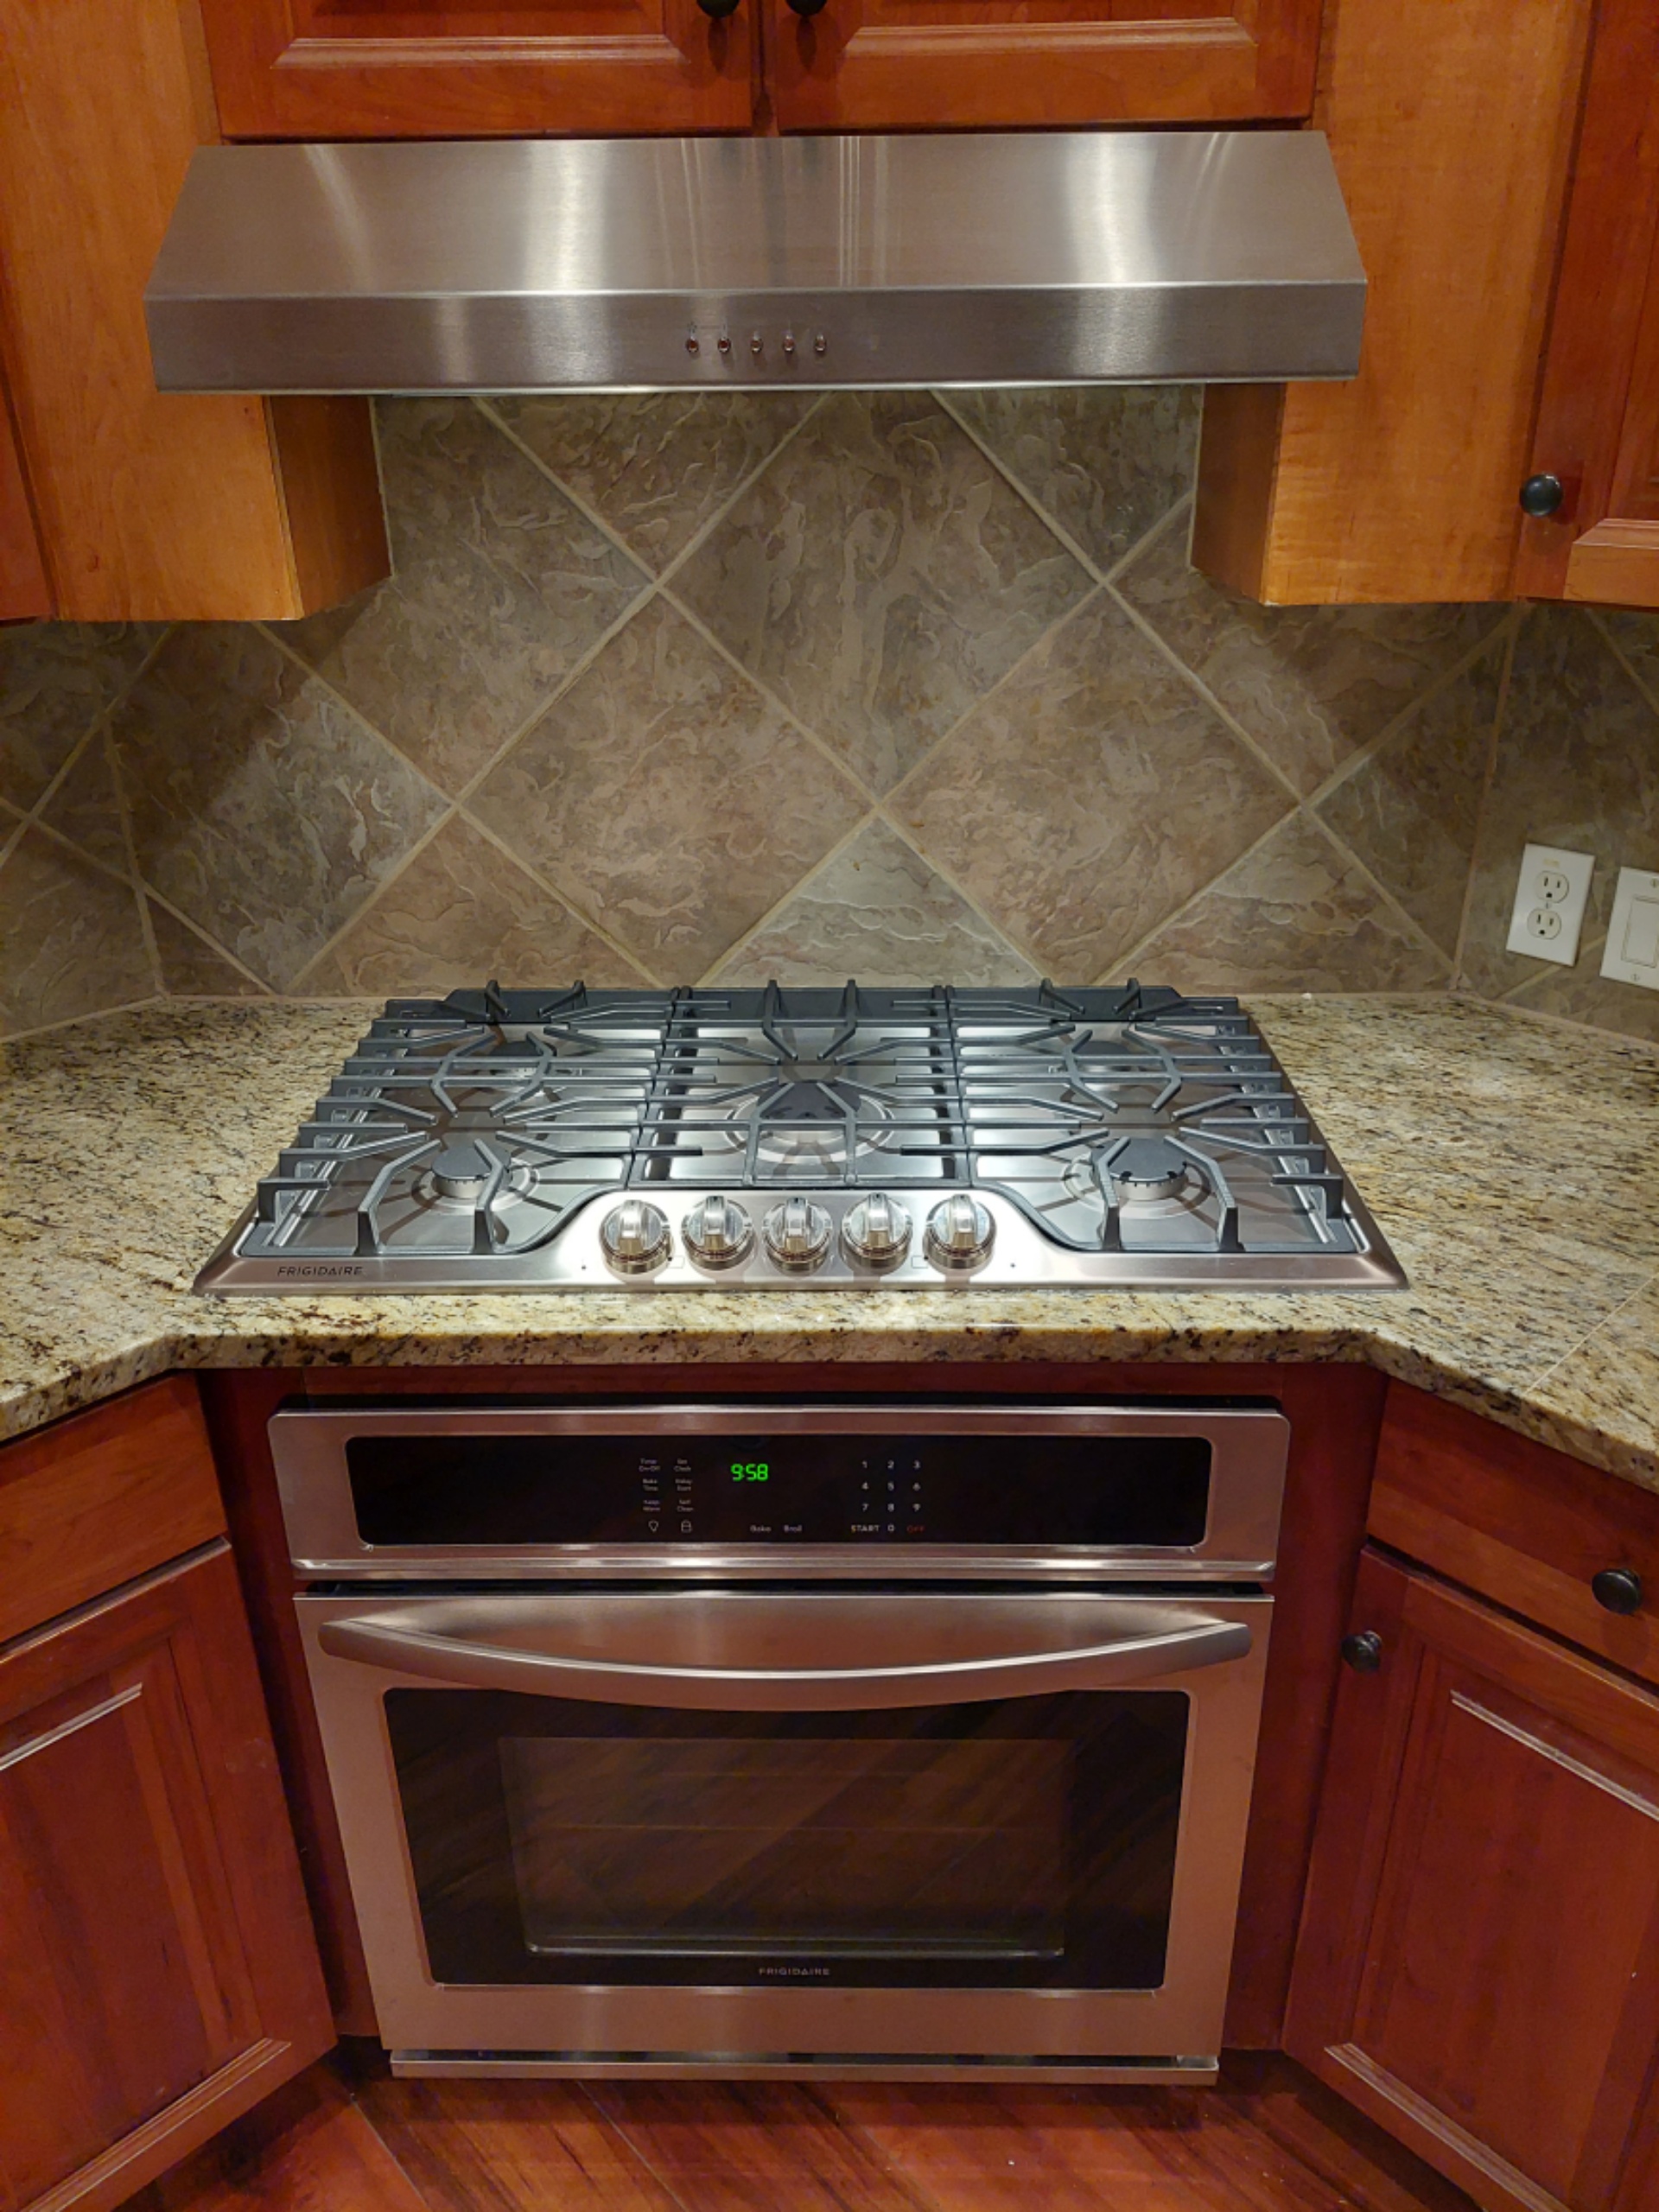 Bastrop Handyman - After - wall oven and cooktop install